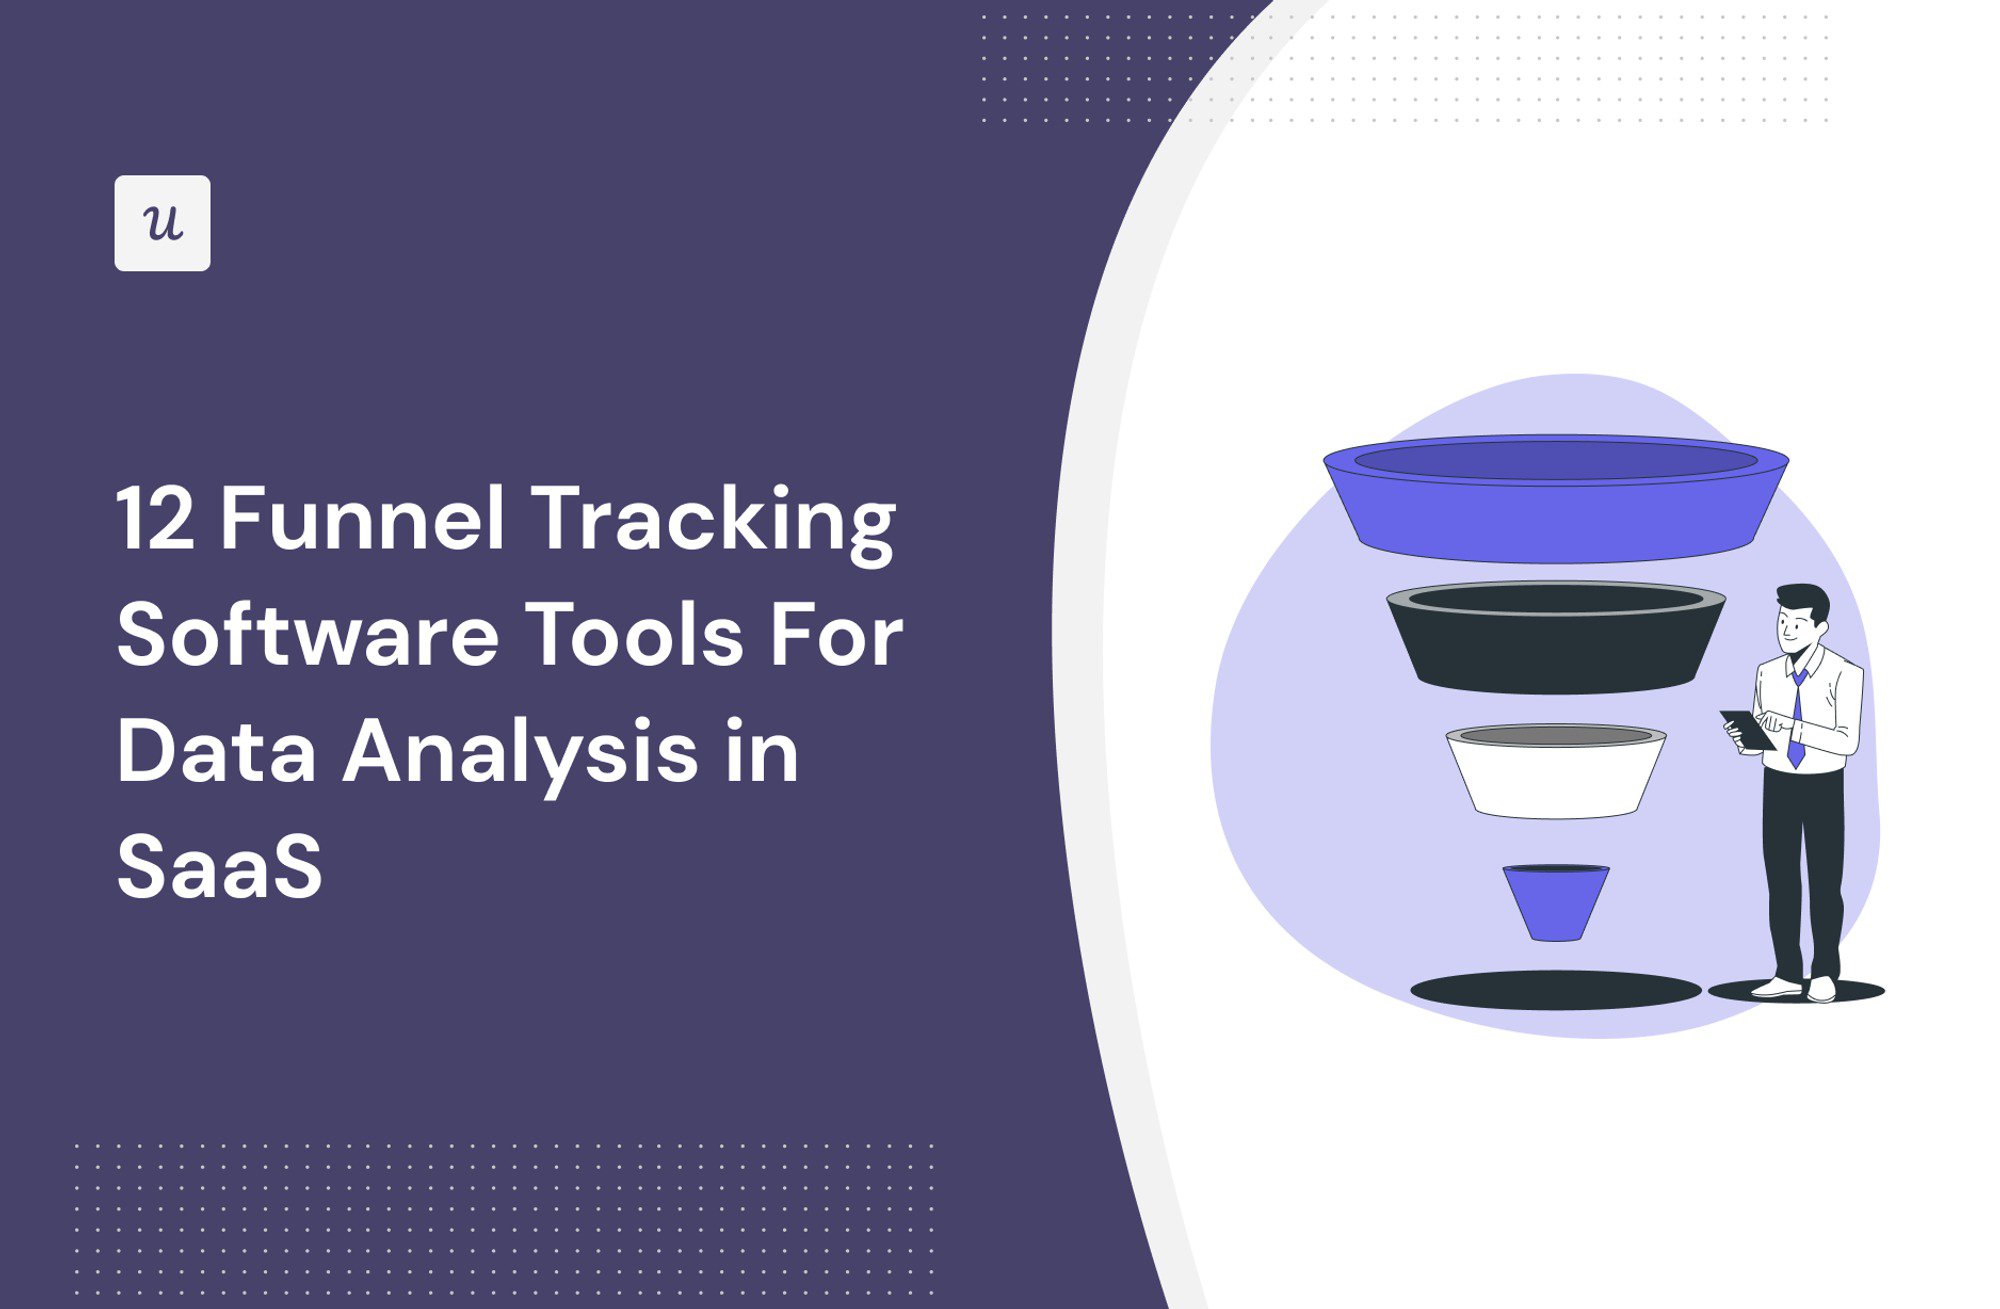 12 Funnel Tracking Software Tools For Data Analysis in SaaS cover